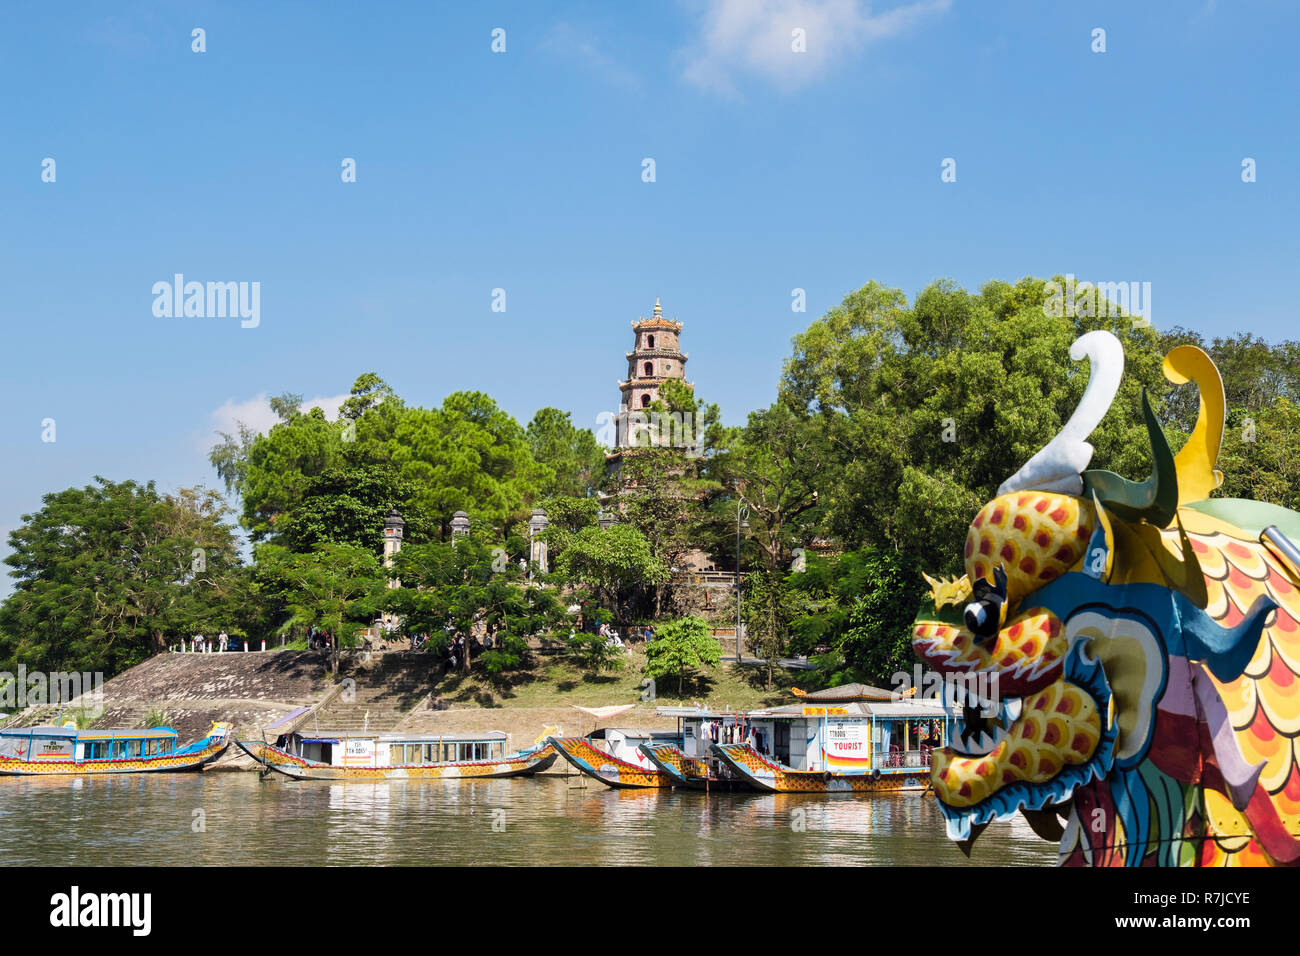 View of Thien Mu Pagoda from a tourists' dragon boat sailing on the Song Huong or Perfume River. Hue, Thua Thien–Hue, Vietnam, Asia Stock Photo